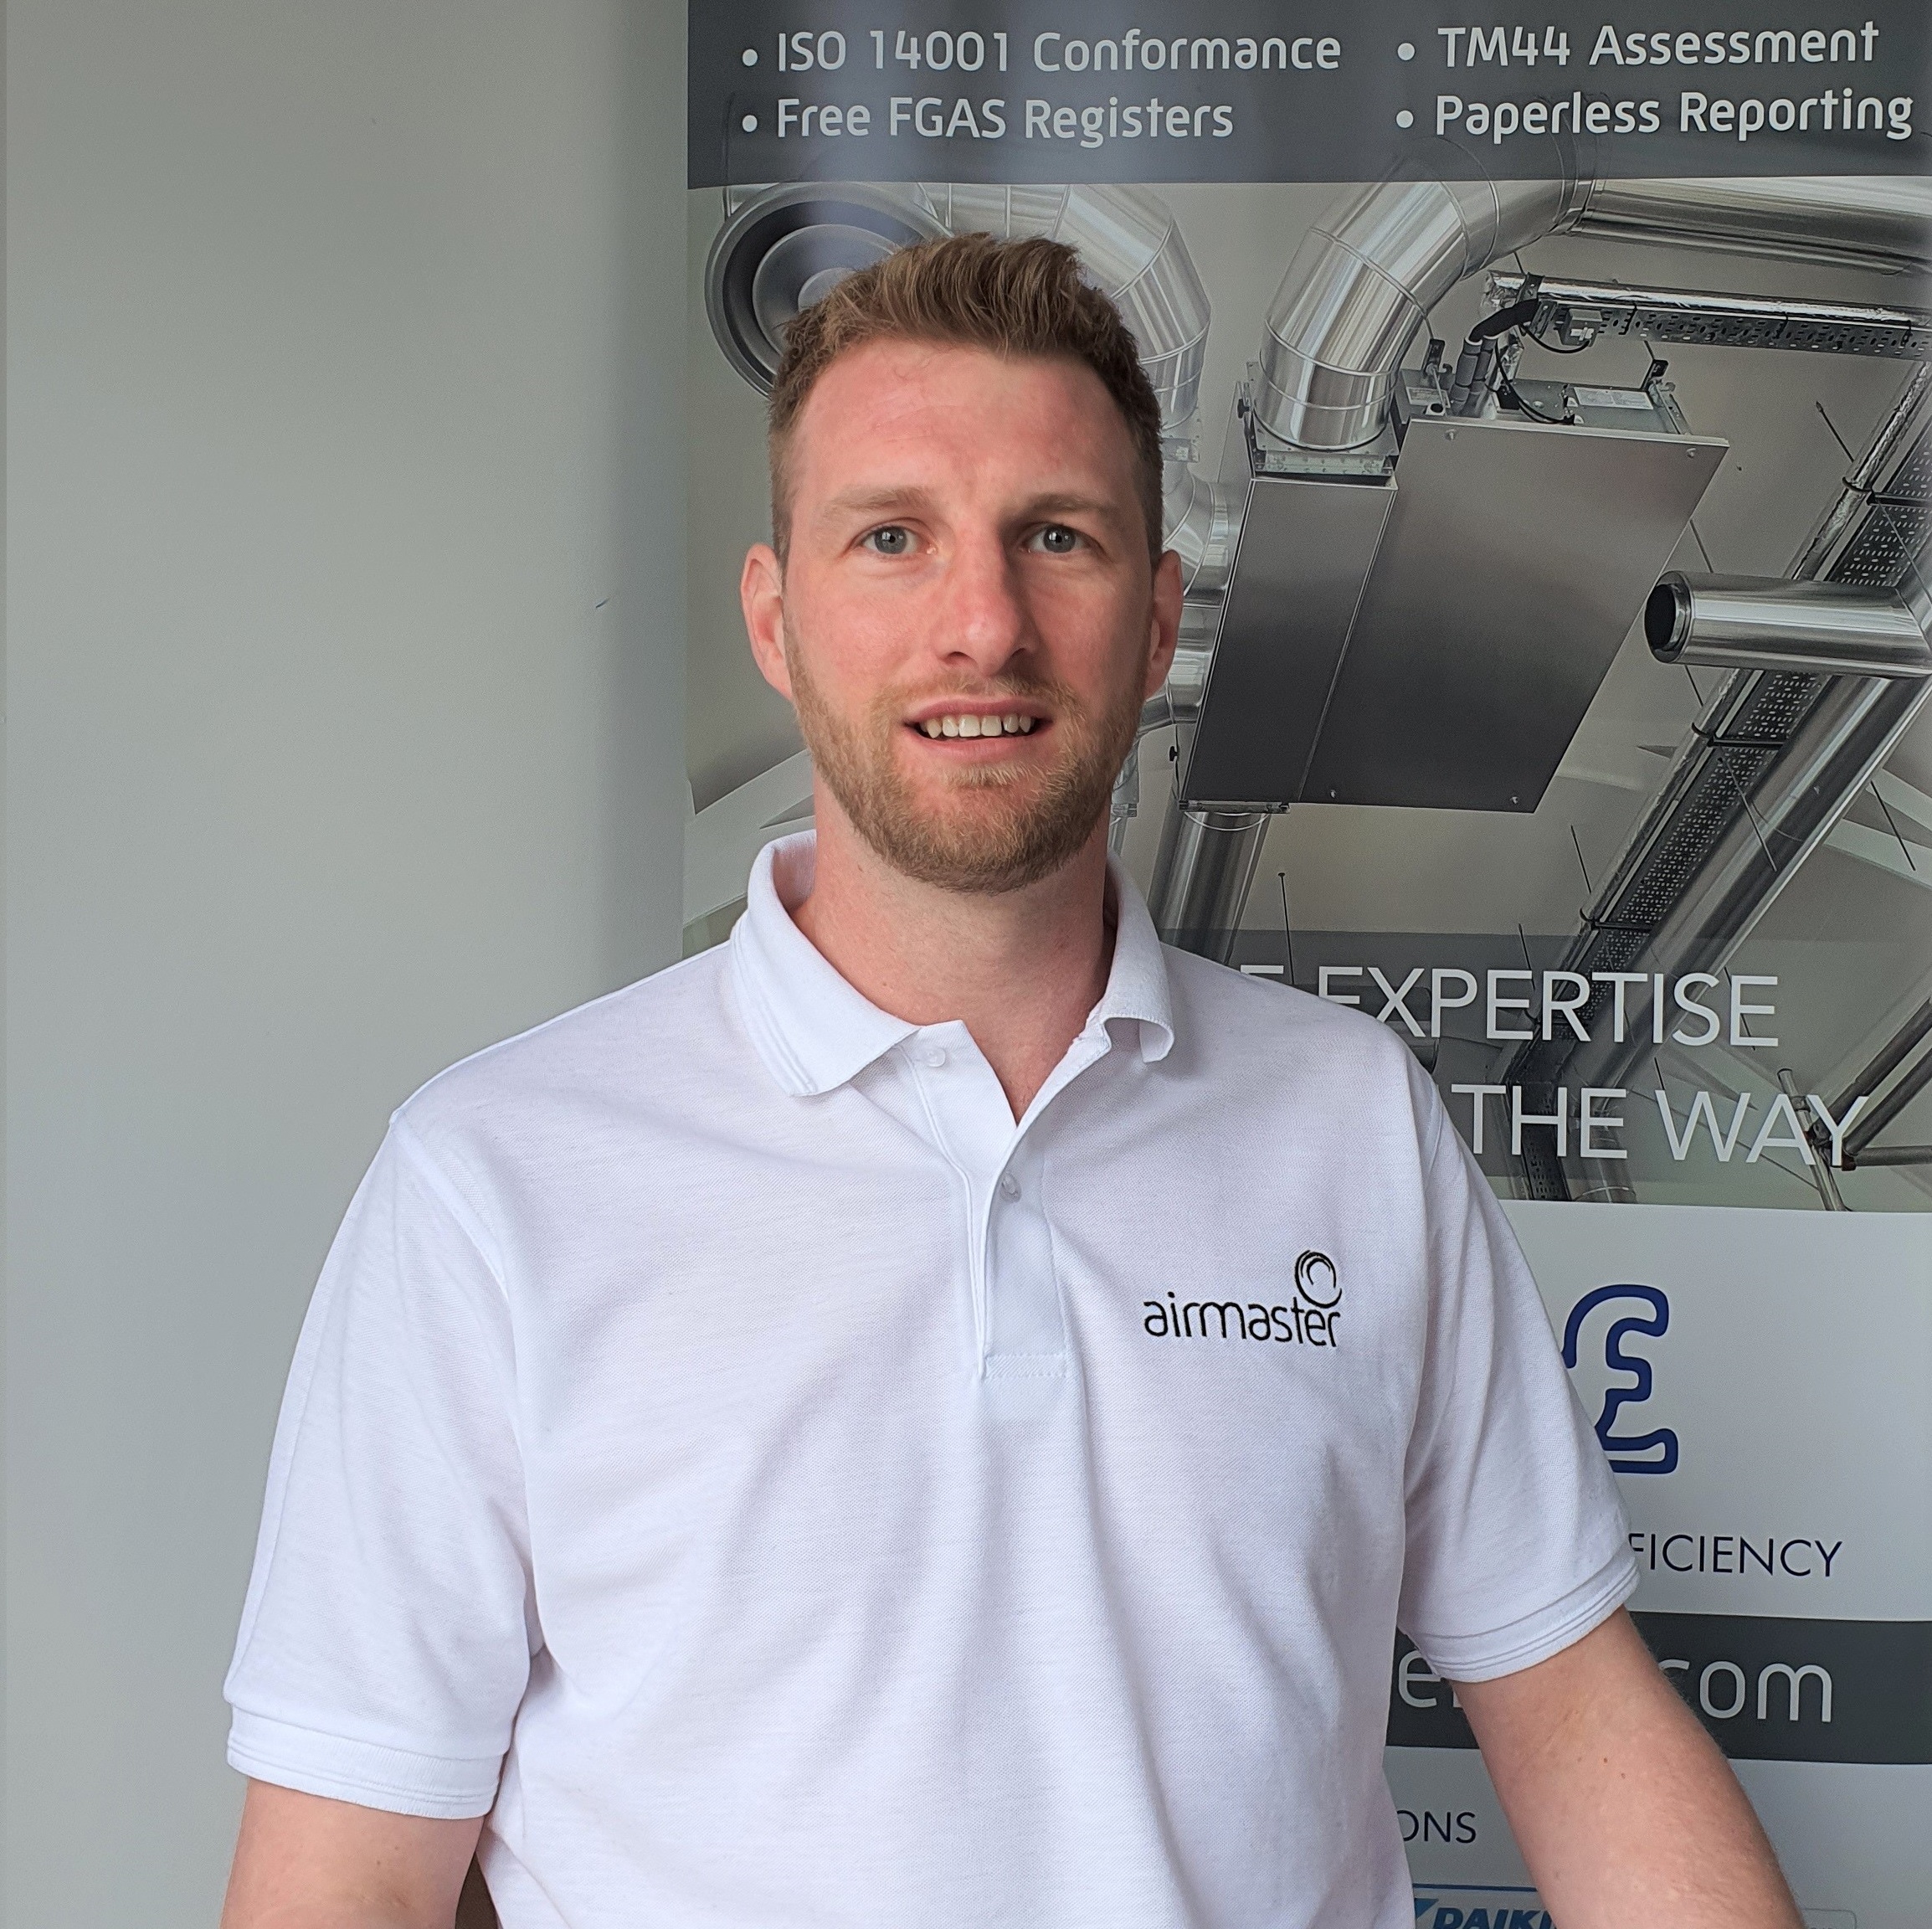 Image for Airmaster appoints new Senior Contracts Manager in their Maintenance Department